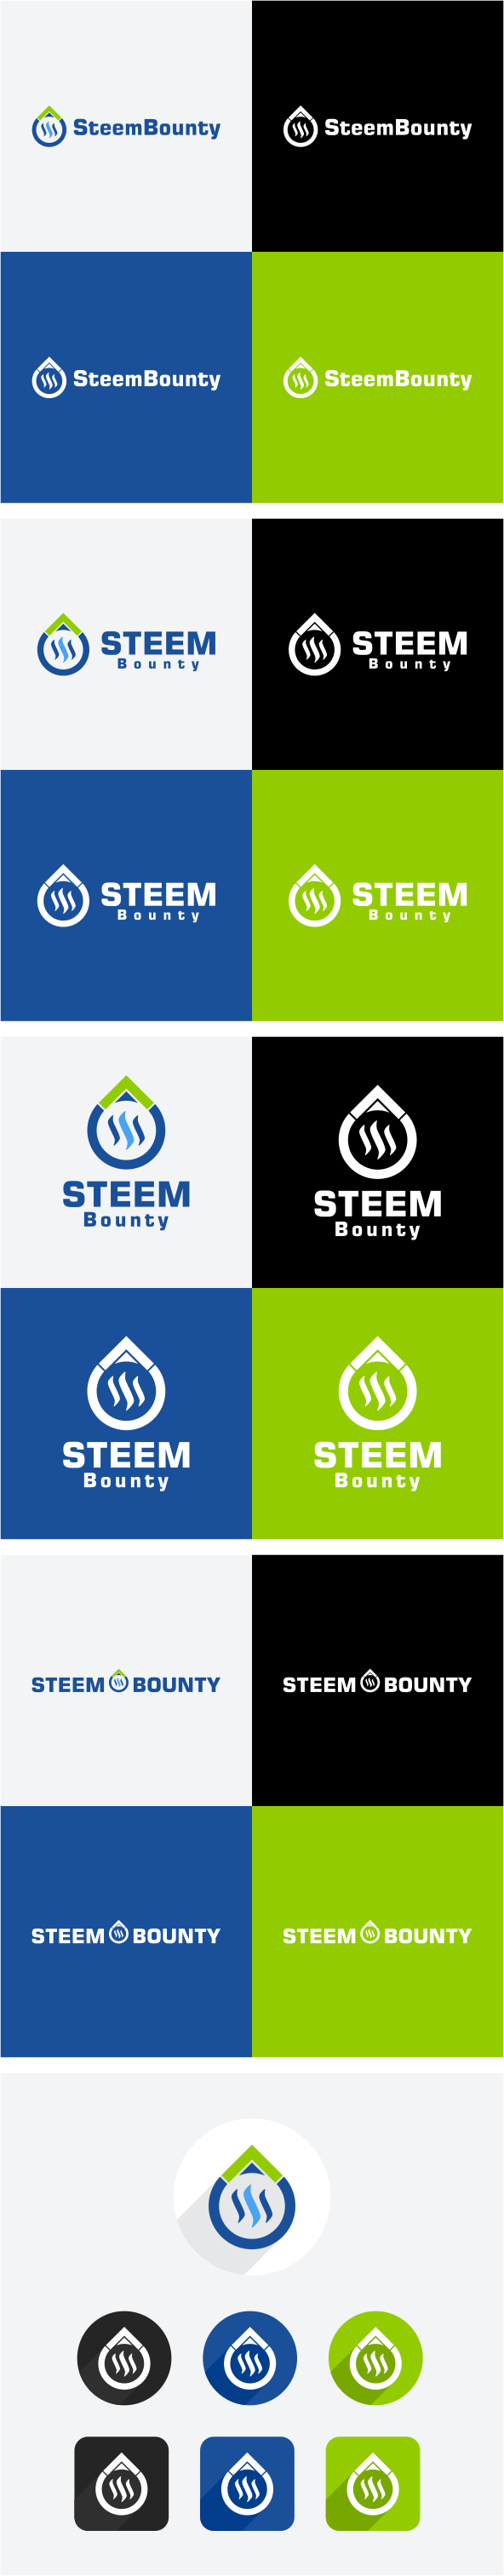 Steem Bounty Second x.png